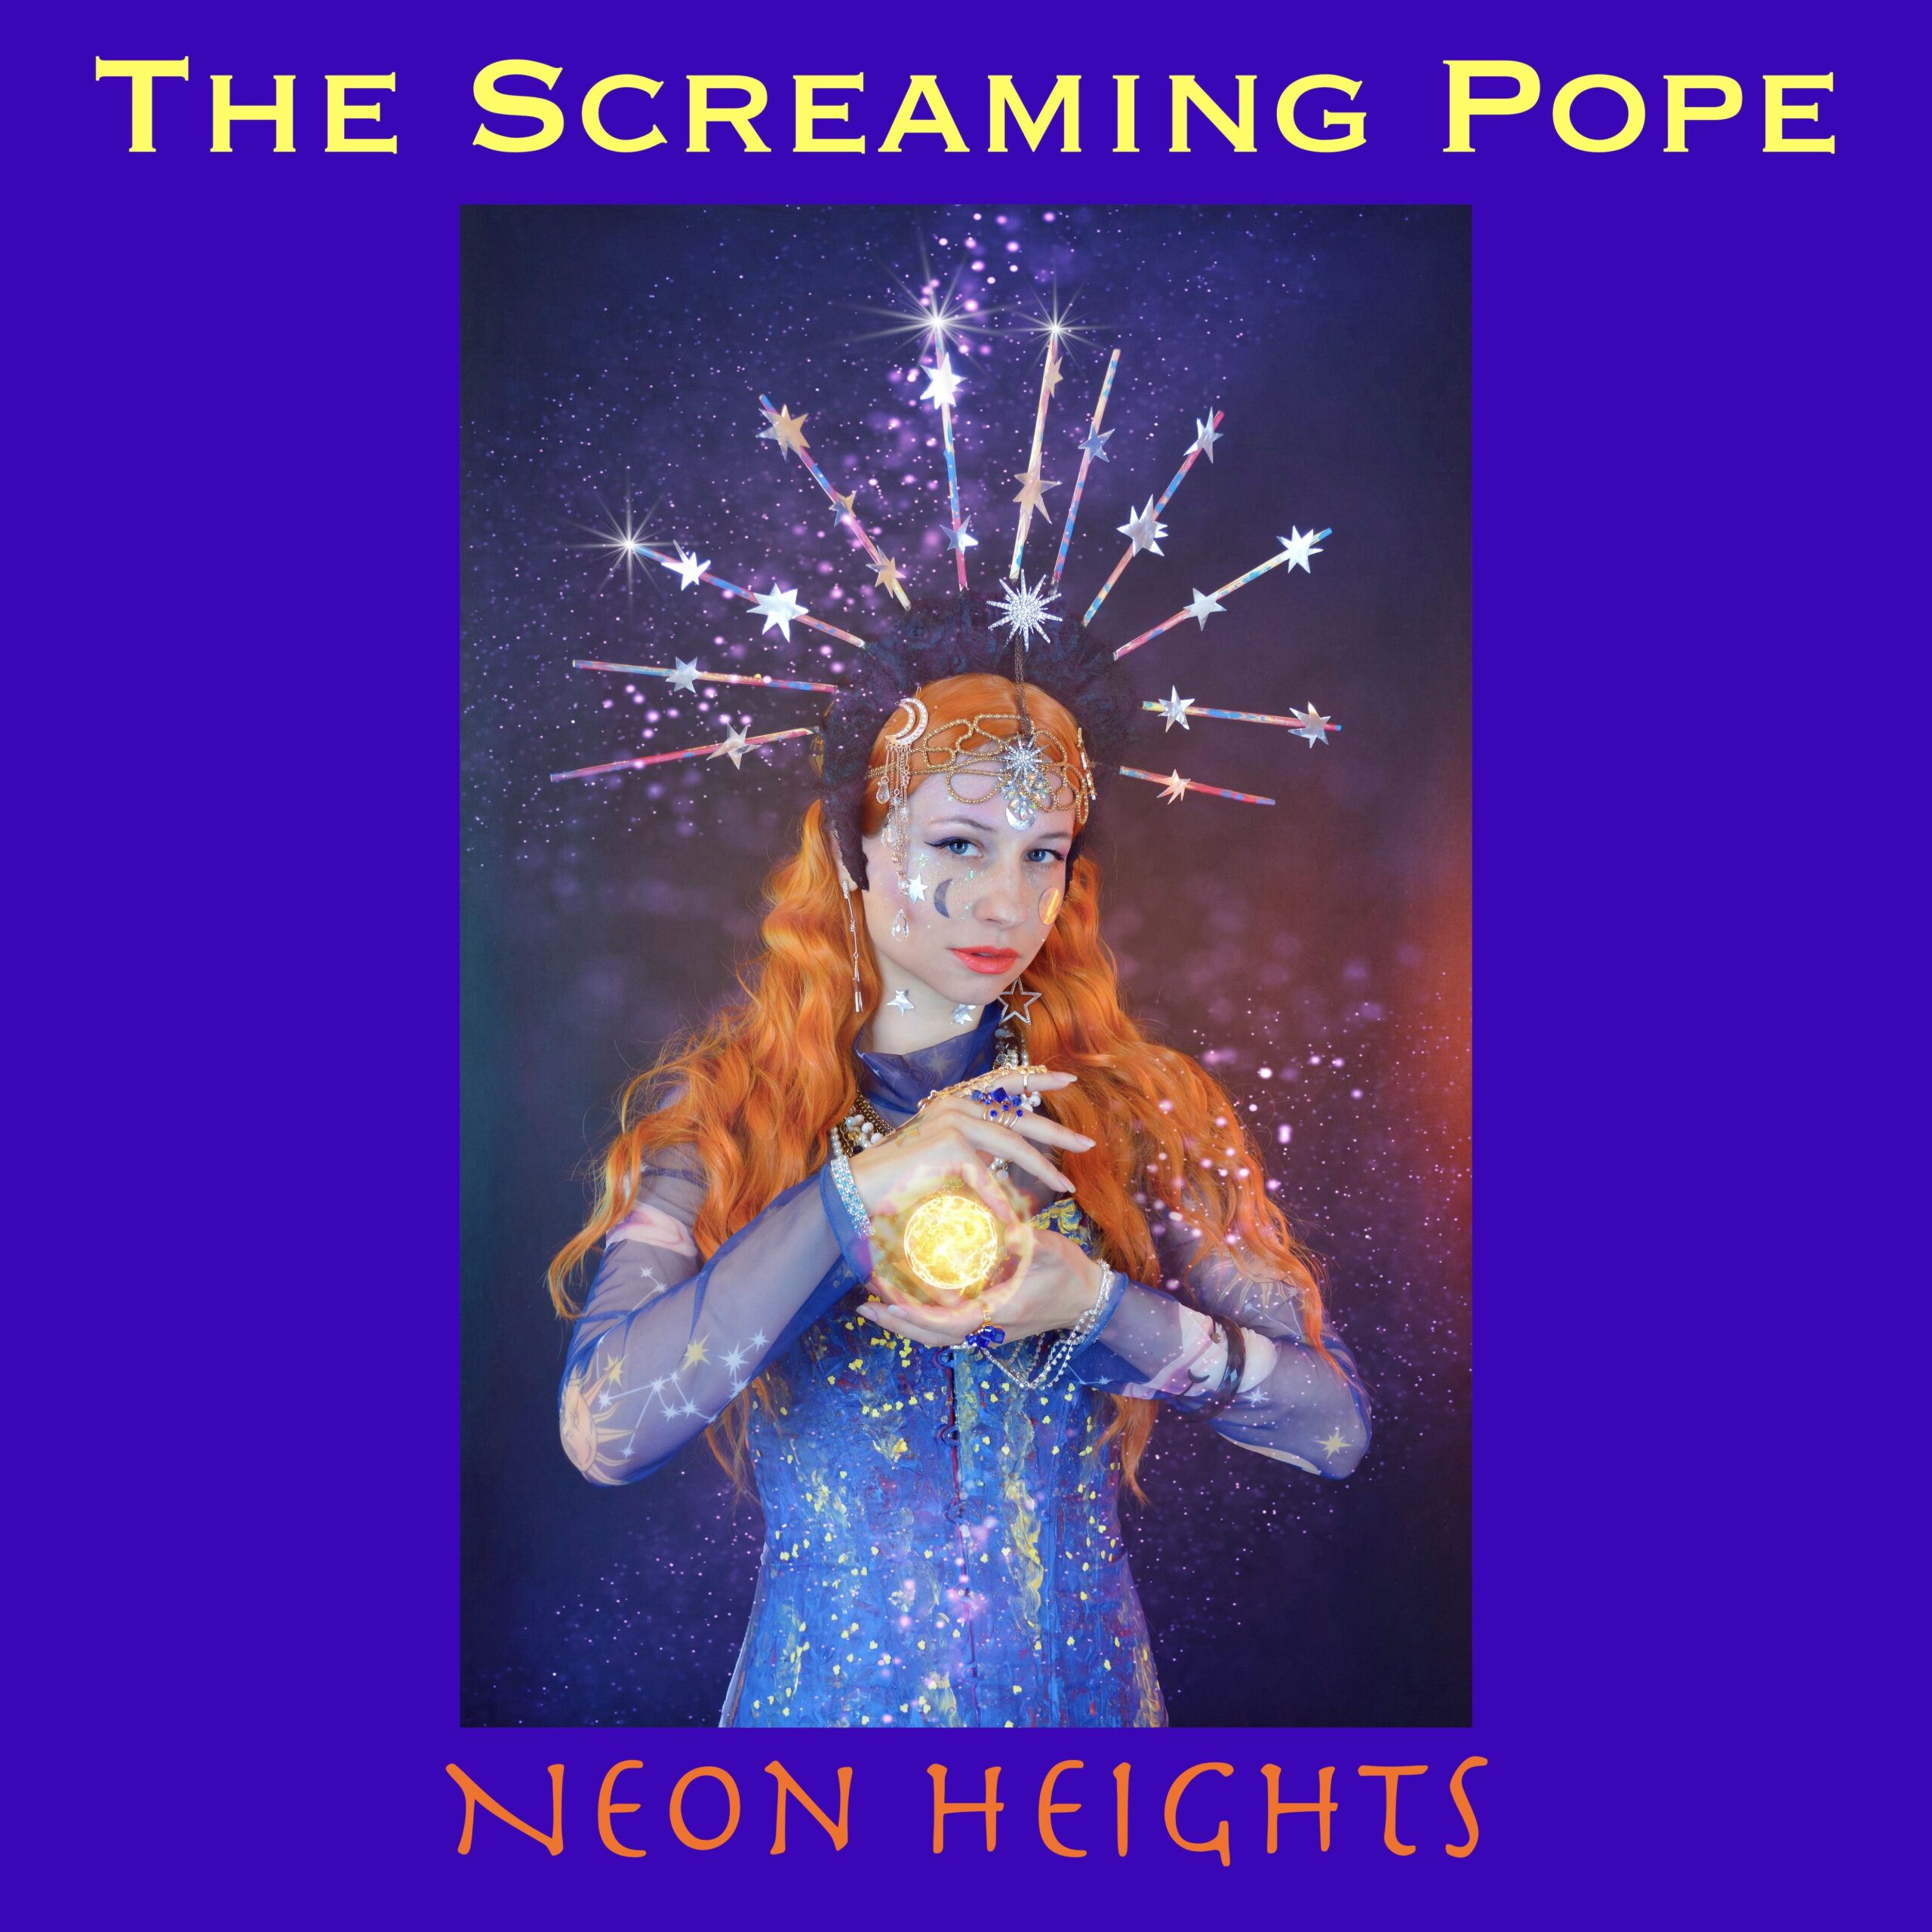 Neon Heights by THE SCREAMING POPE an album cover art